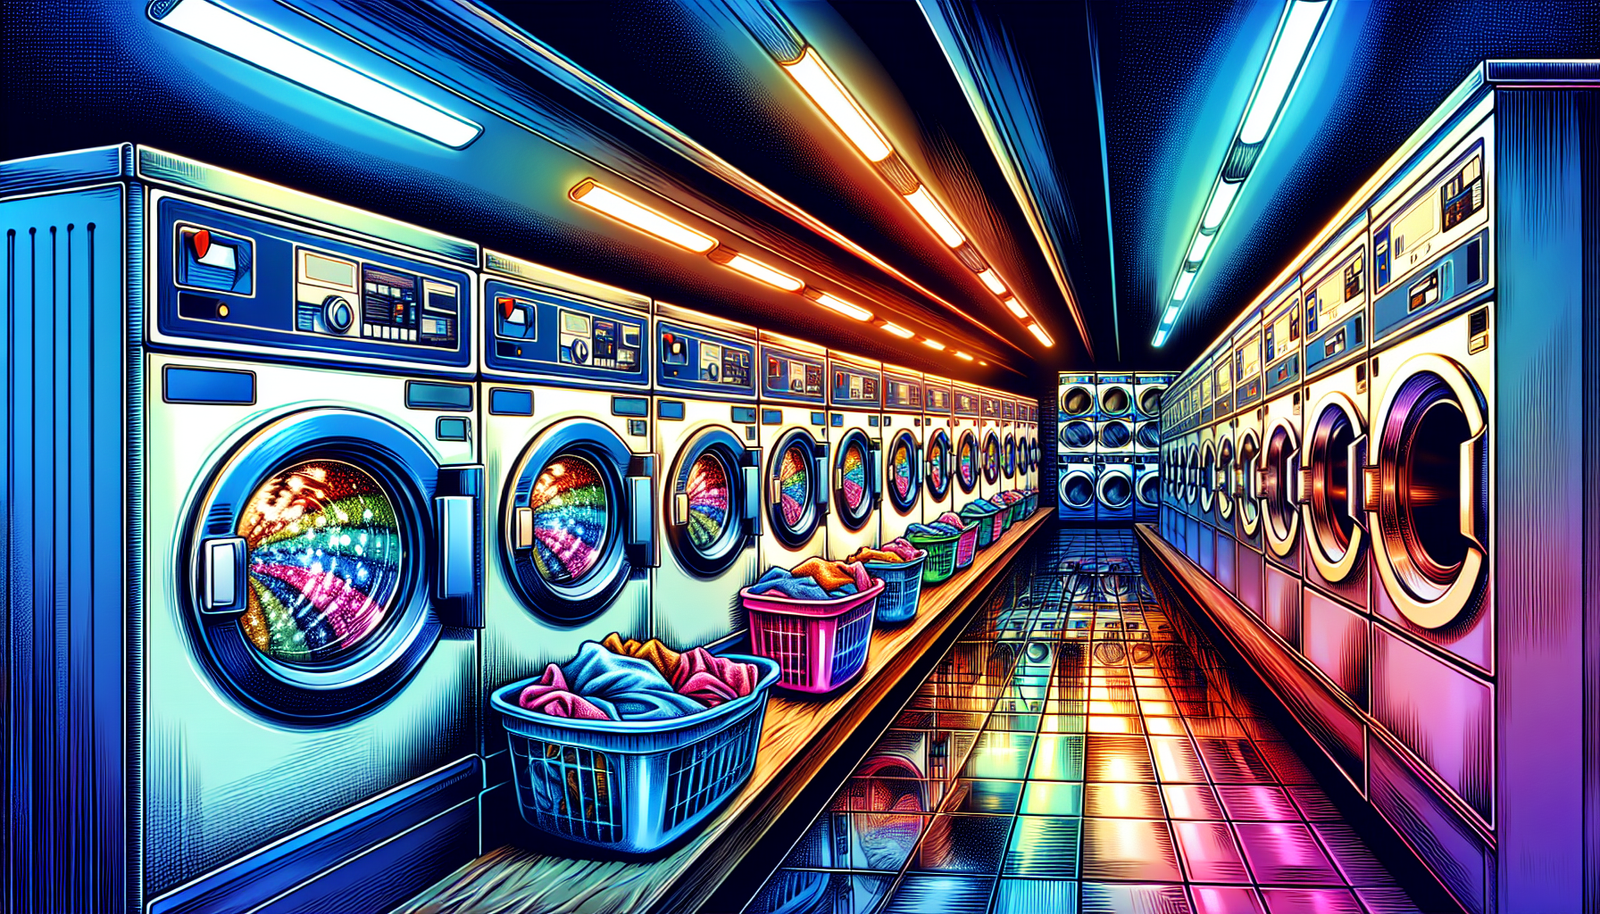 Illustration of a row of washing machines and dryers in a laundromat